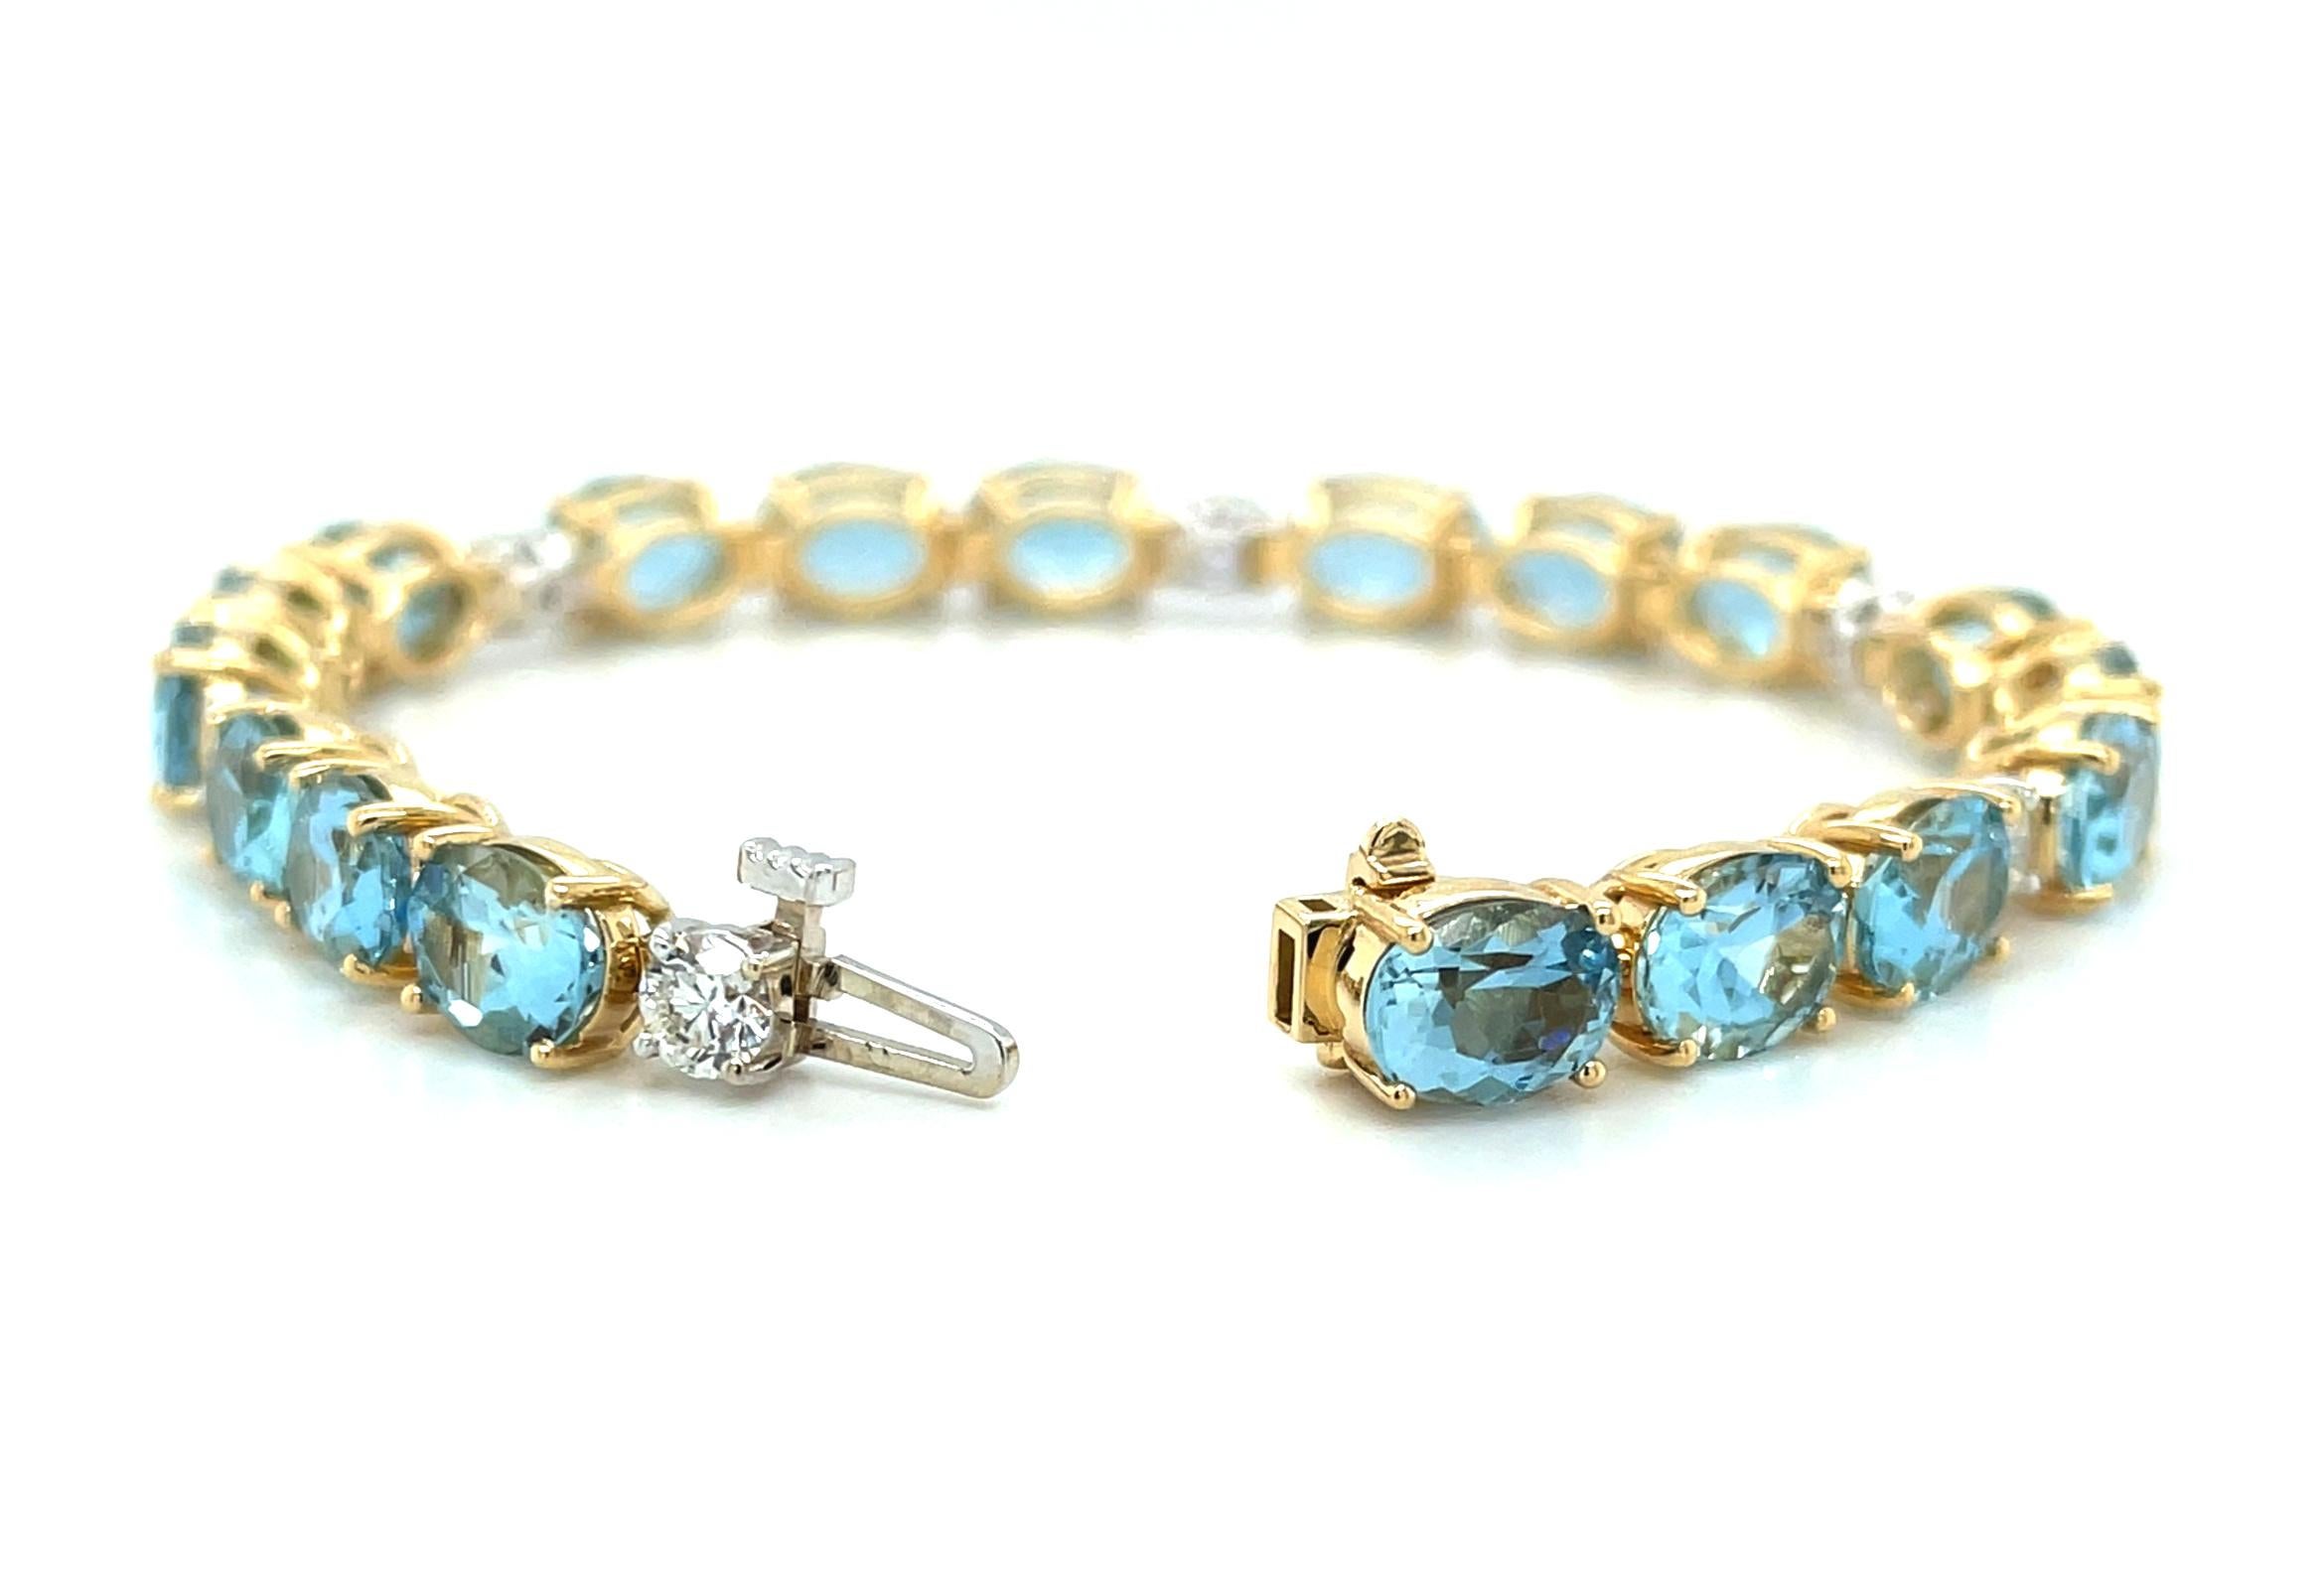 This sparkling aquamarine and diamond tennis bracelet is absolutely stunning! It is set with 18 beautifully matched, oval aquamarines with eye-catching brilliance and bright medium blue color. Each crystalline gemstone weighs over a carat, large